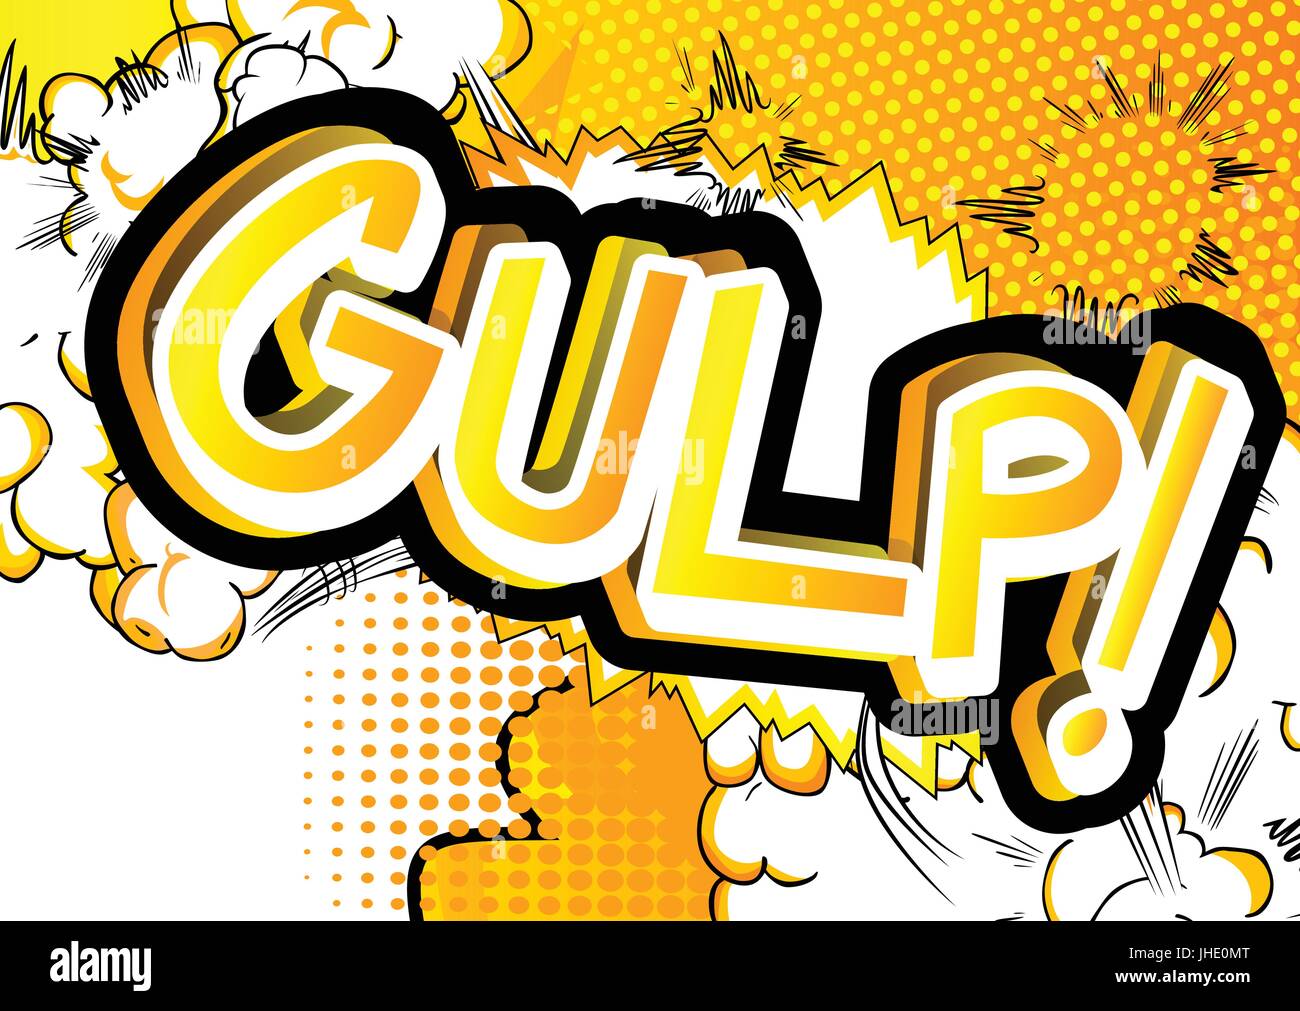 Gulp! - Vector illustrated comic book style expression Stock